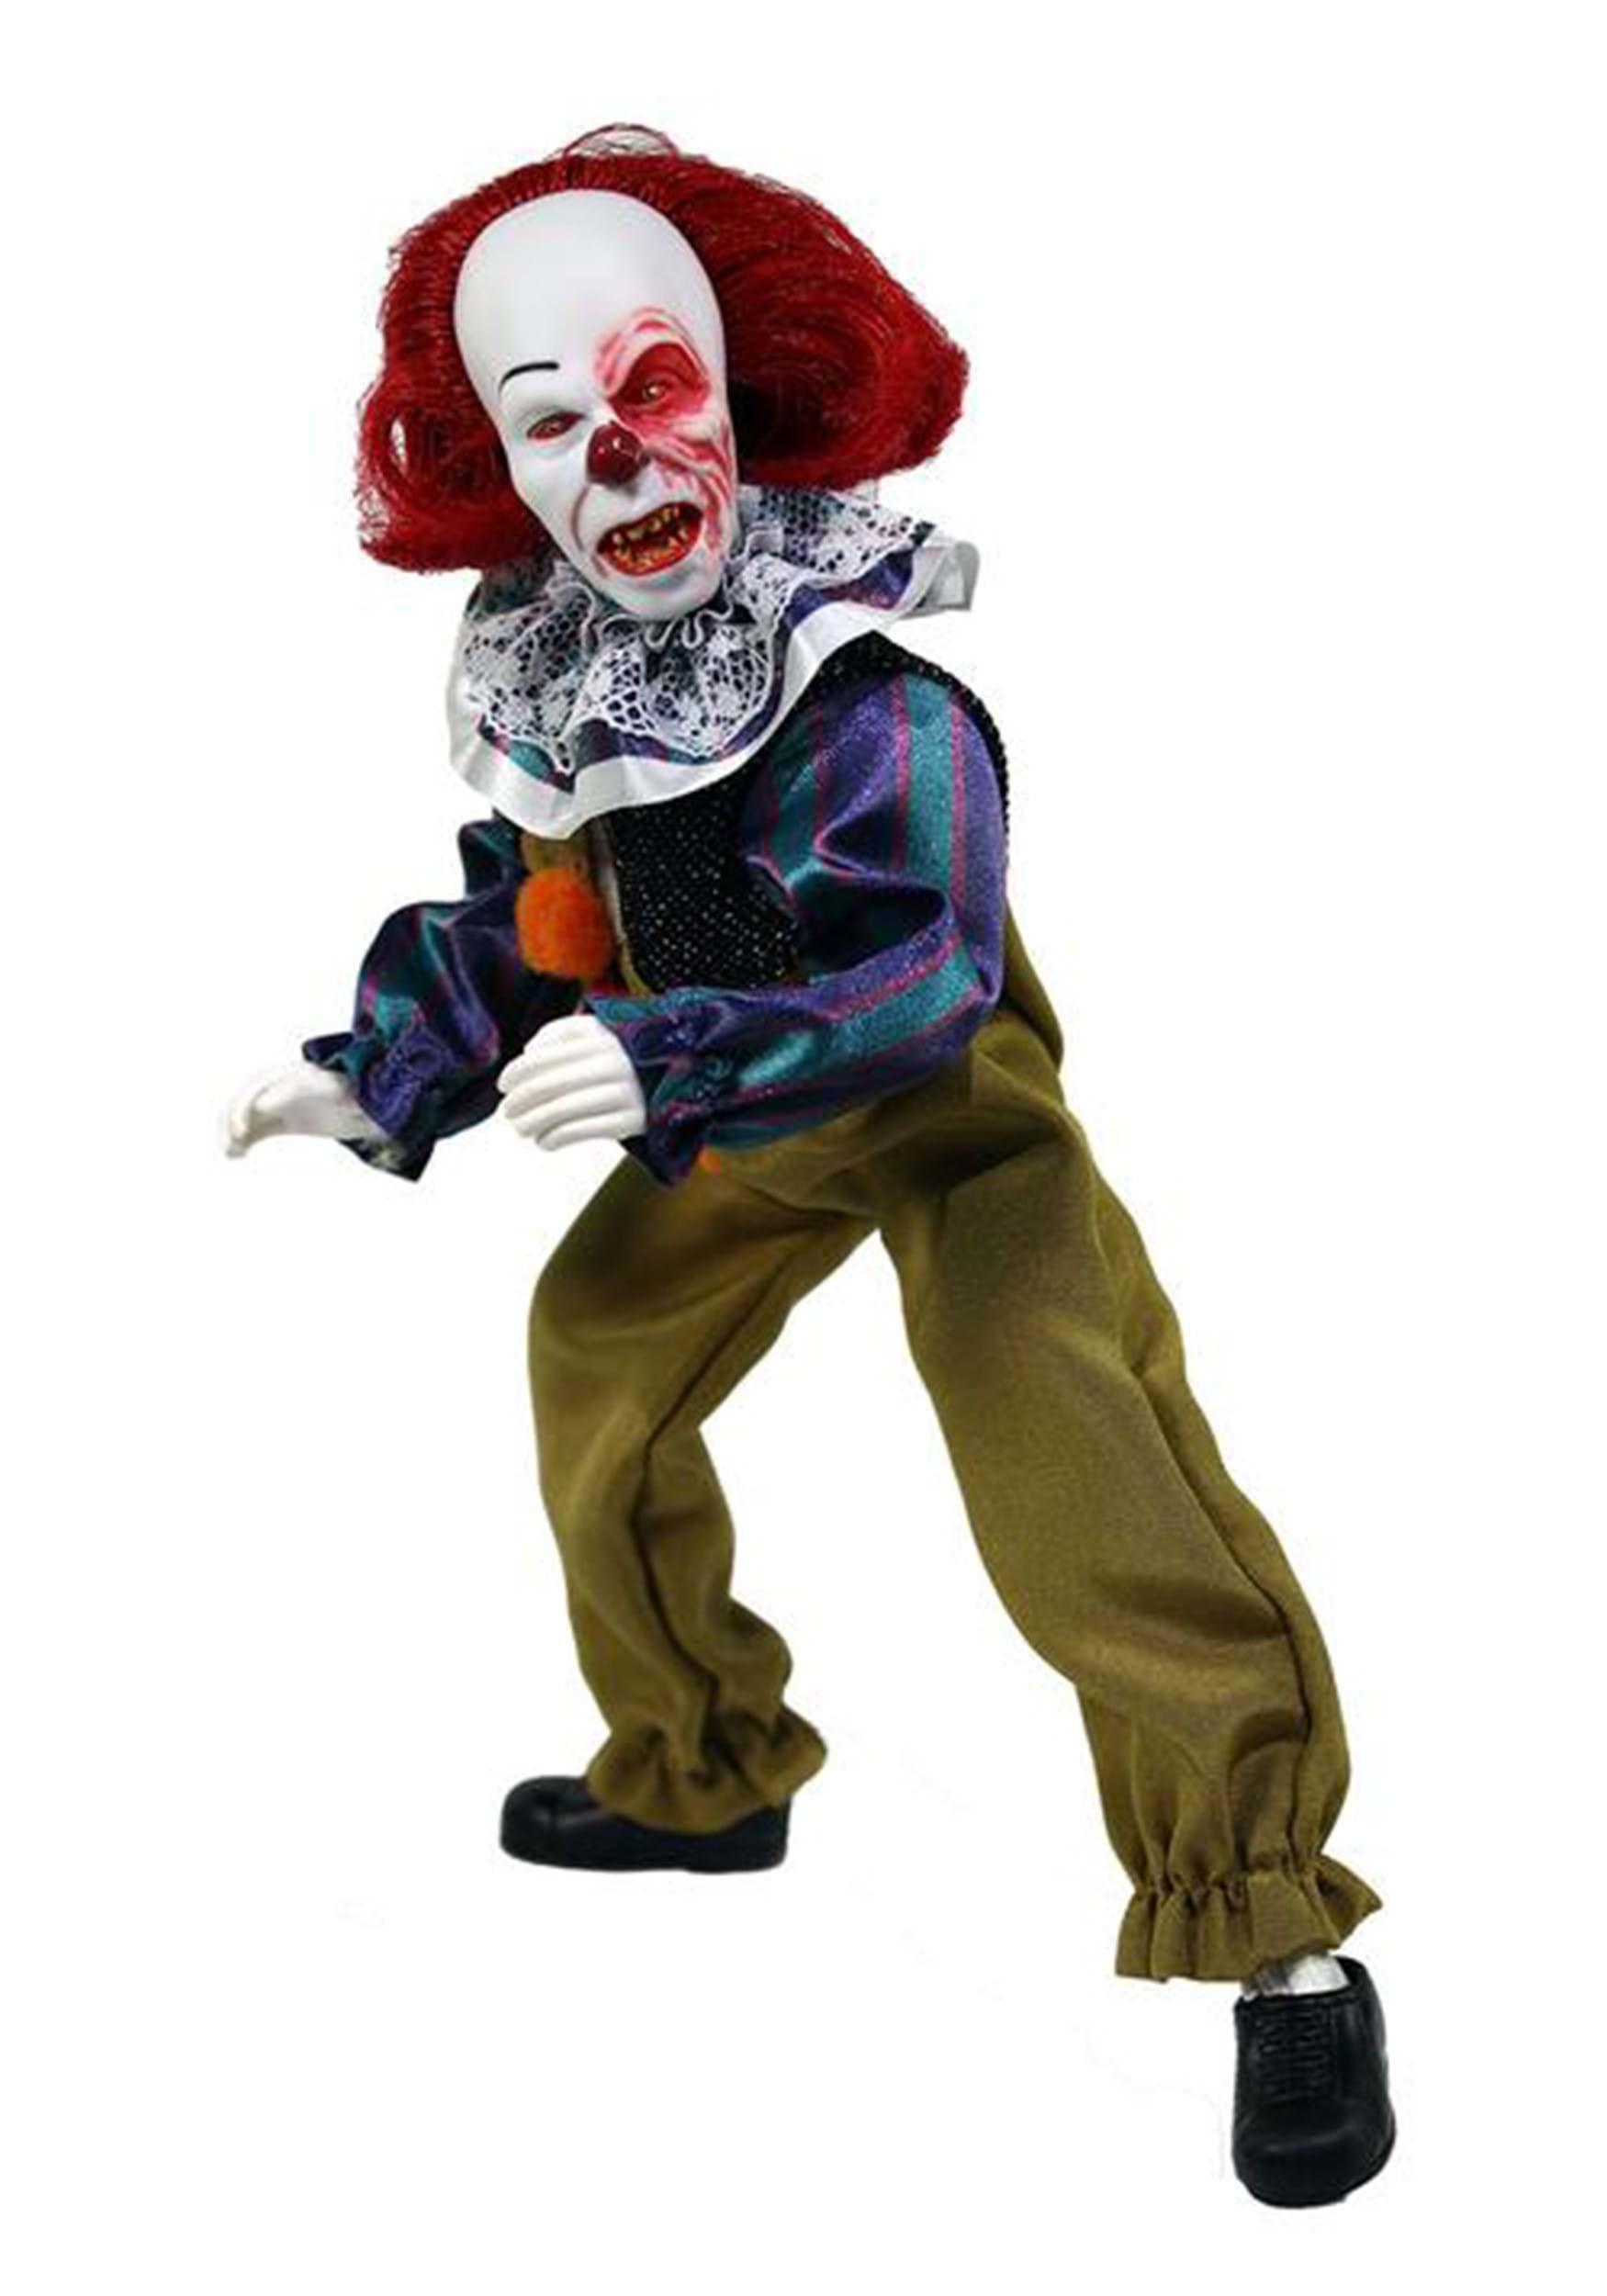 8" Burnt Pennywise Action Figure